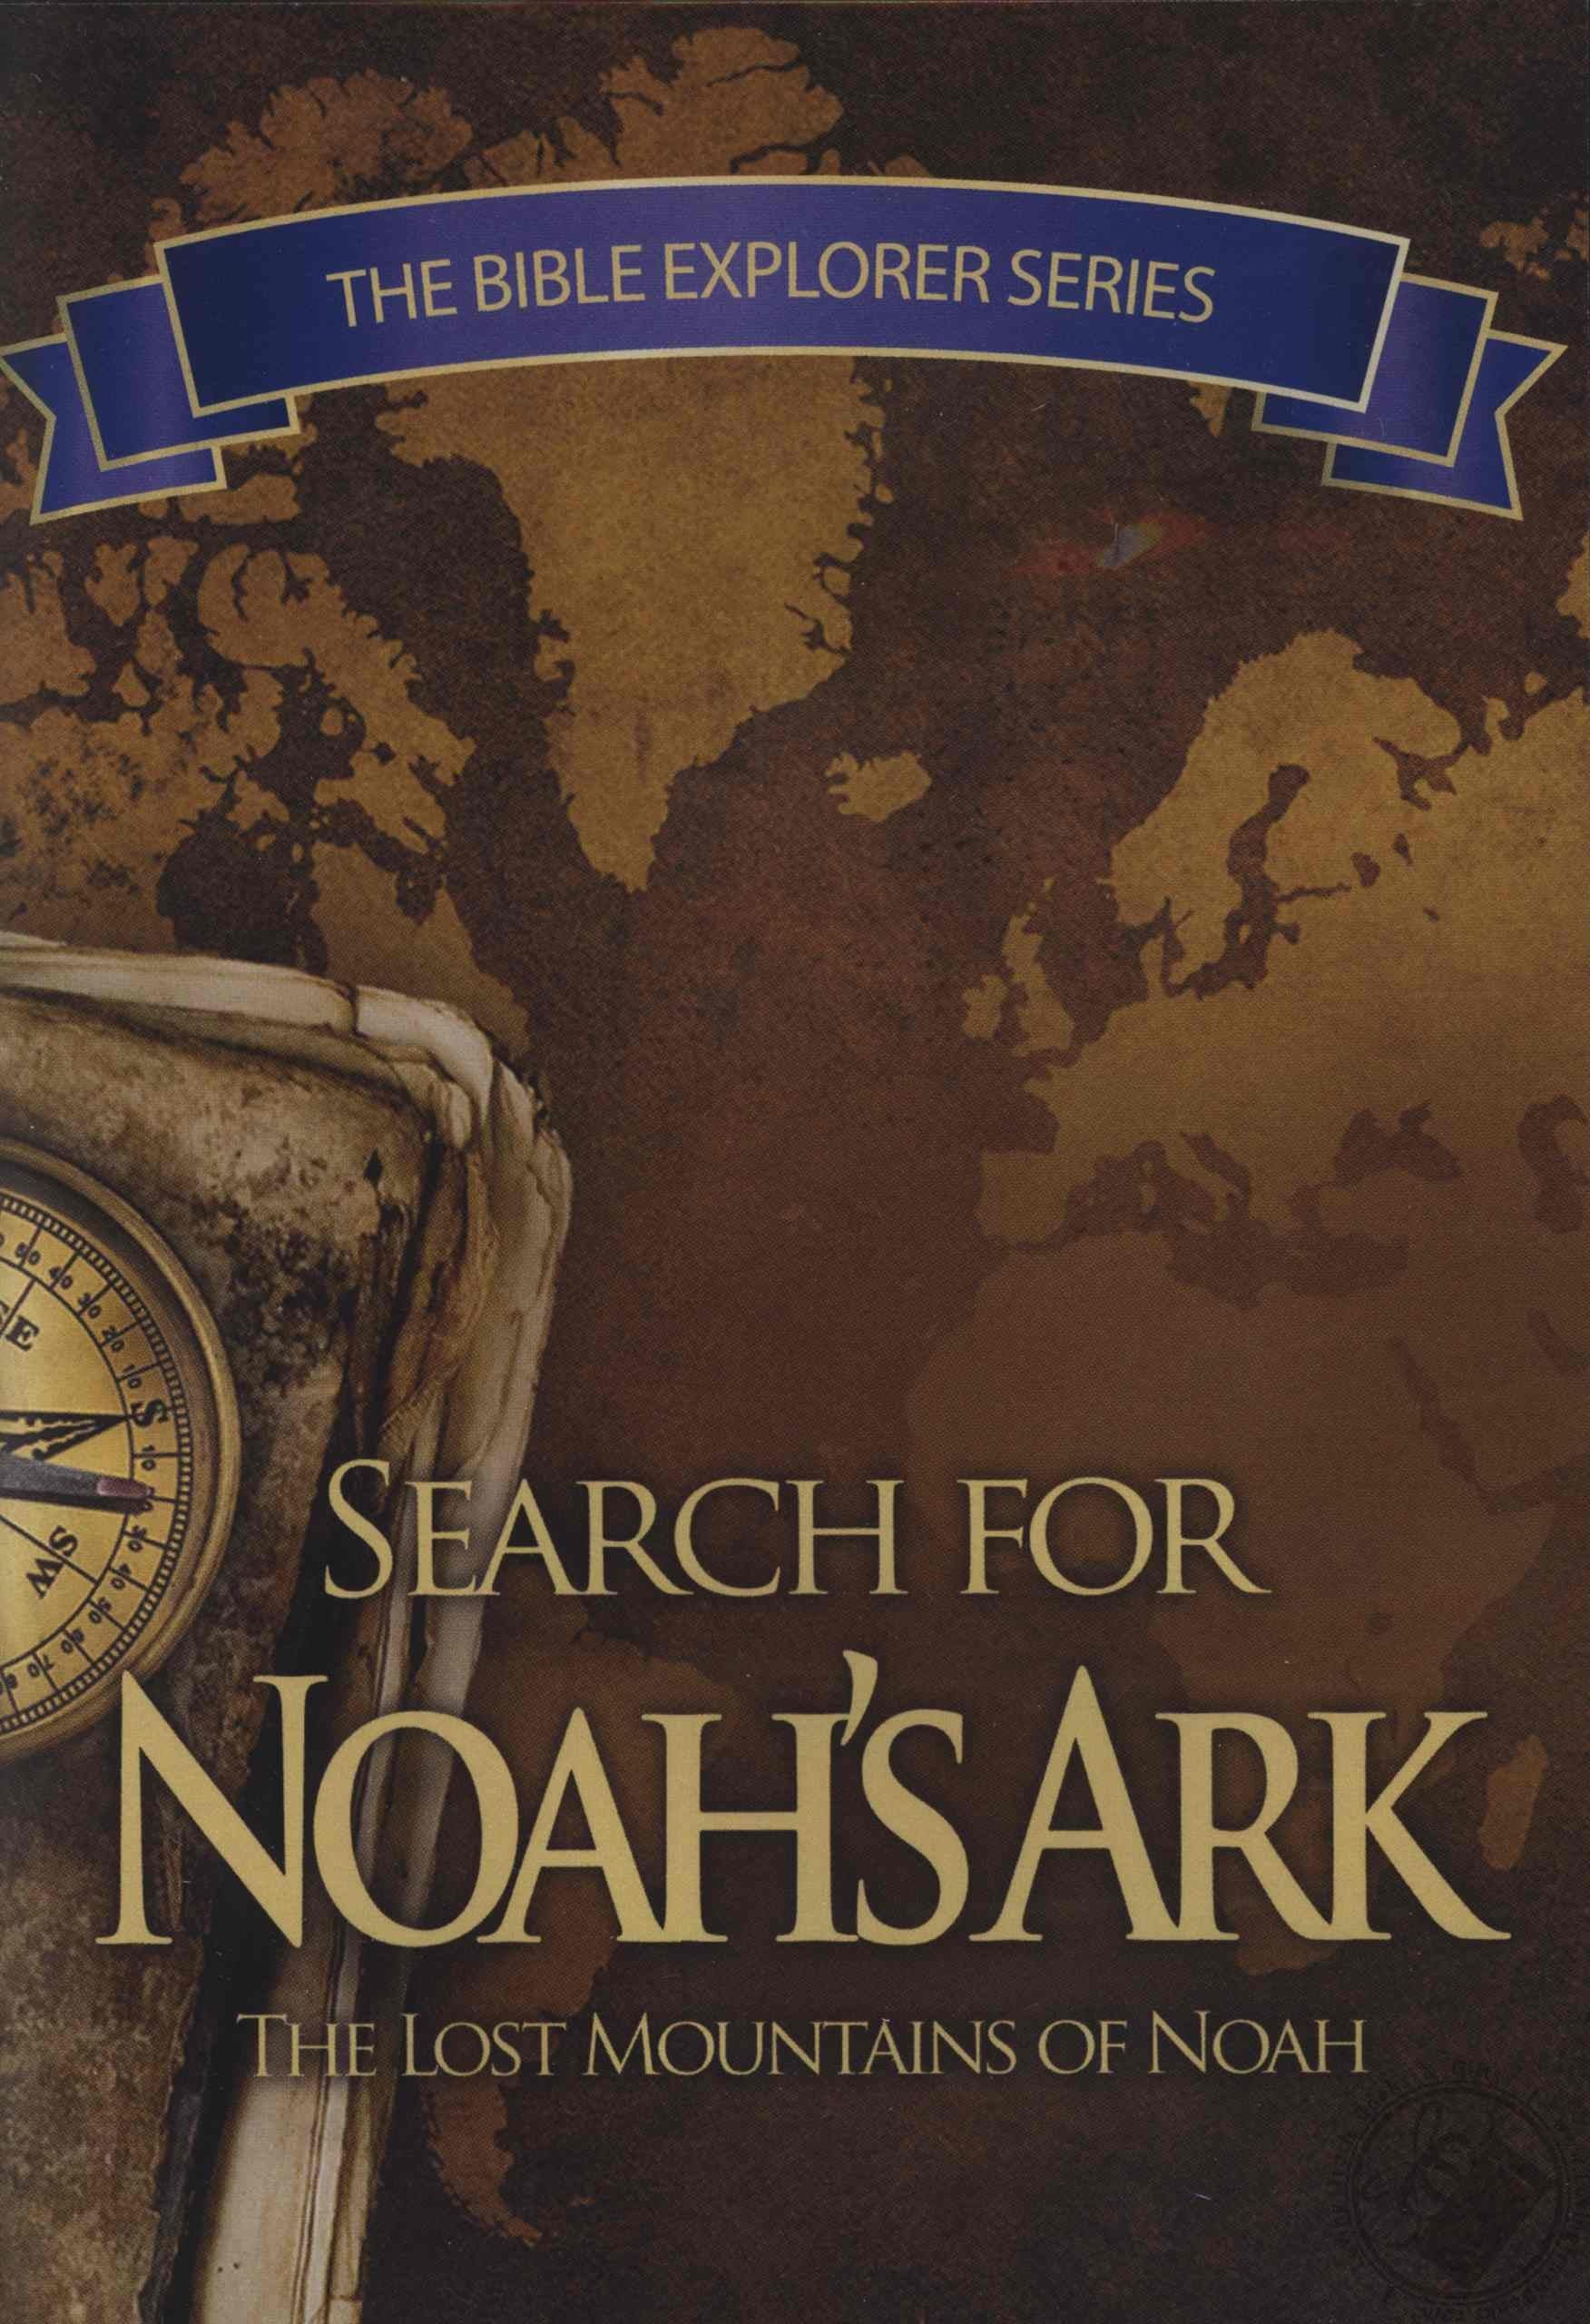 The Search for Noah's Ark